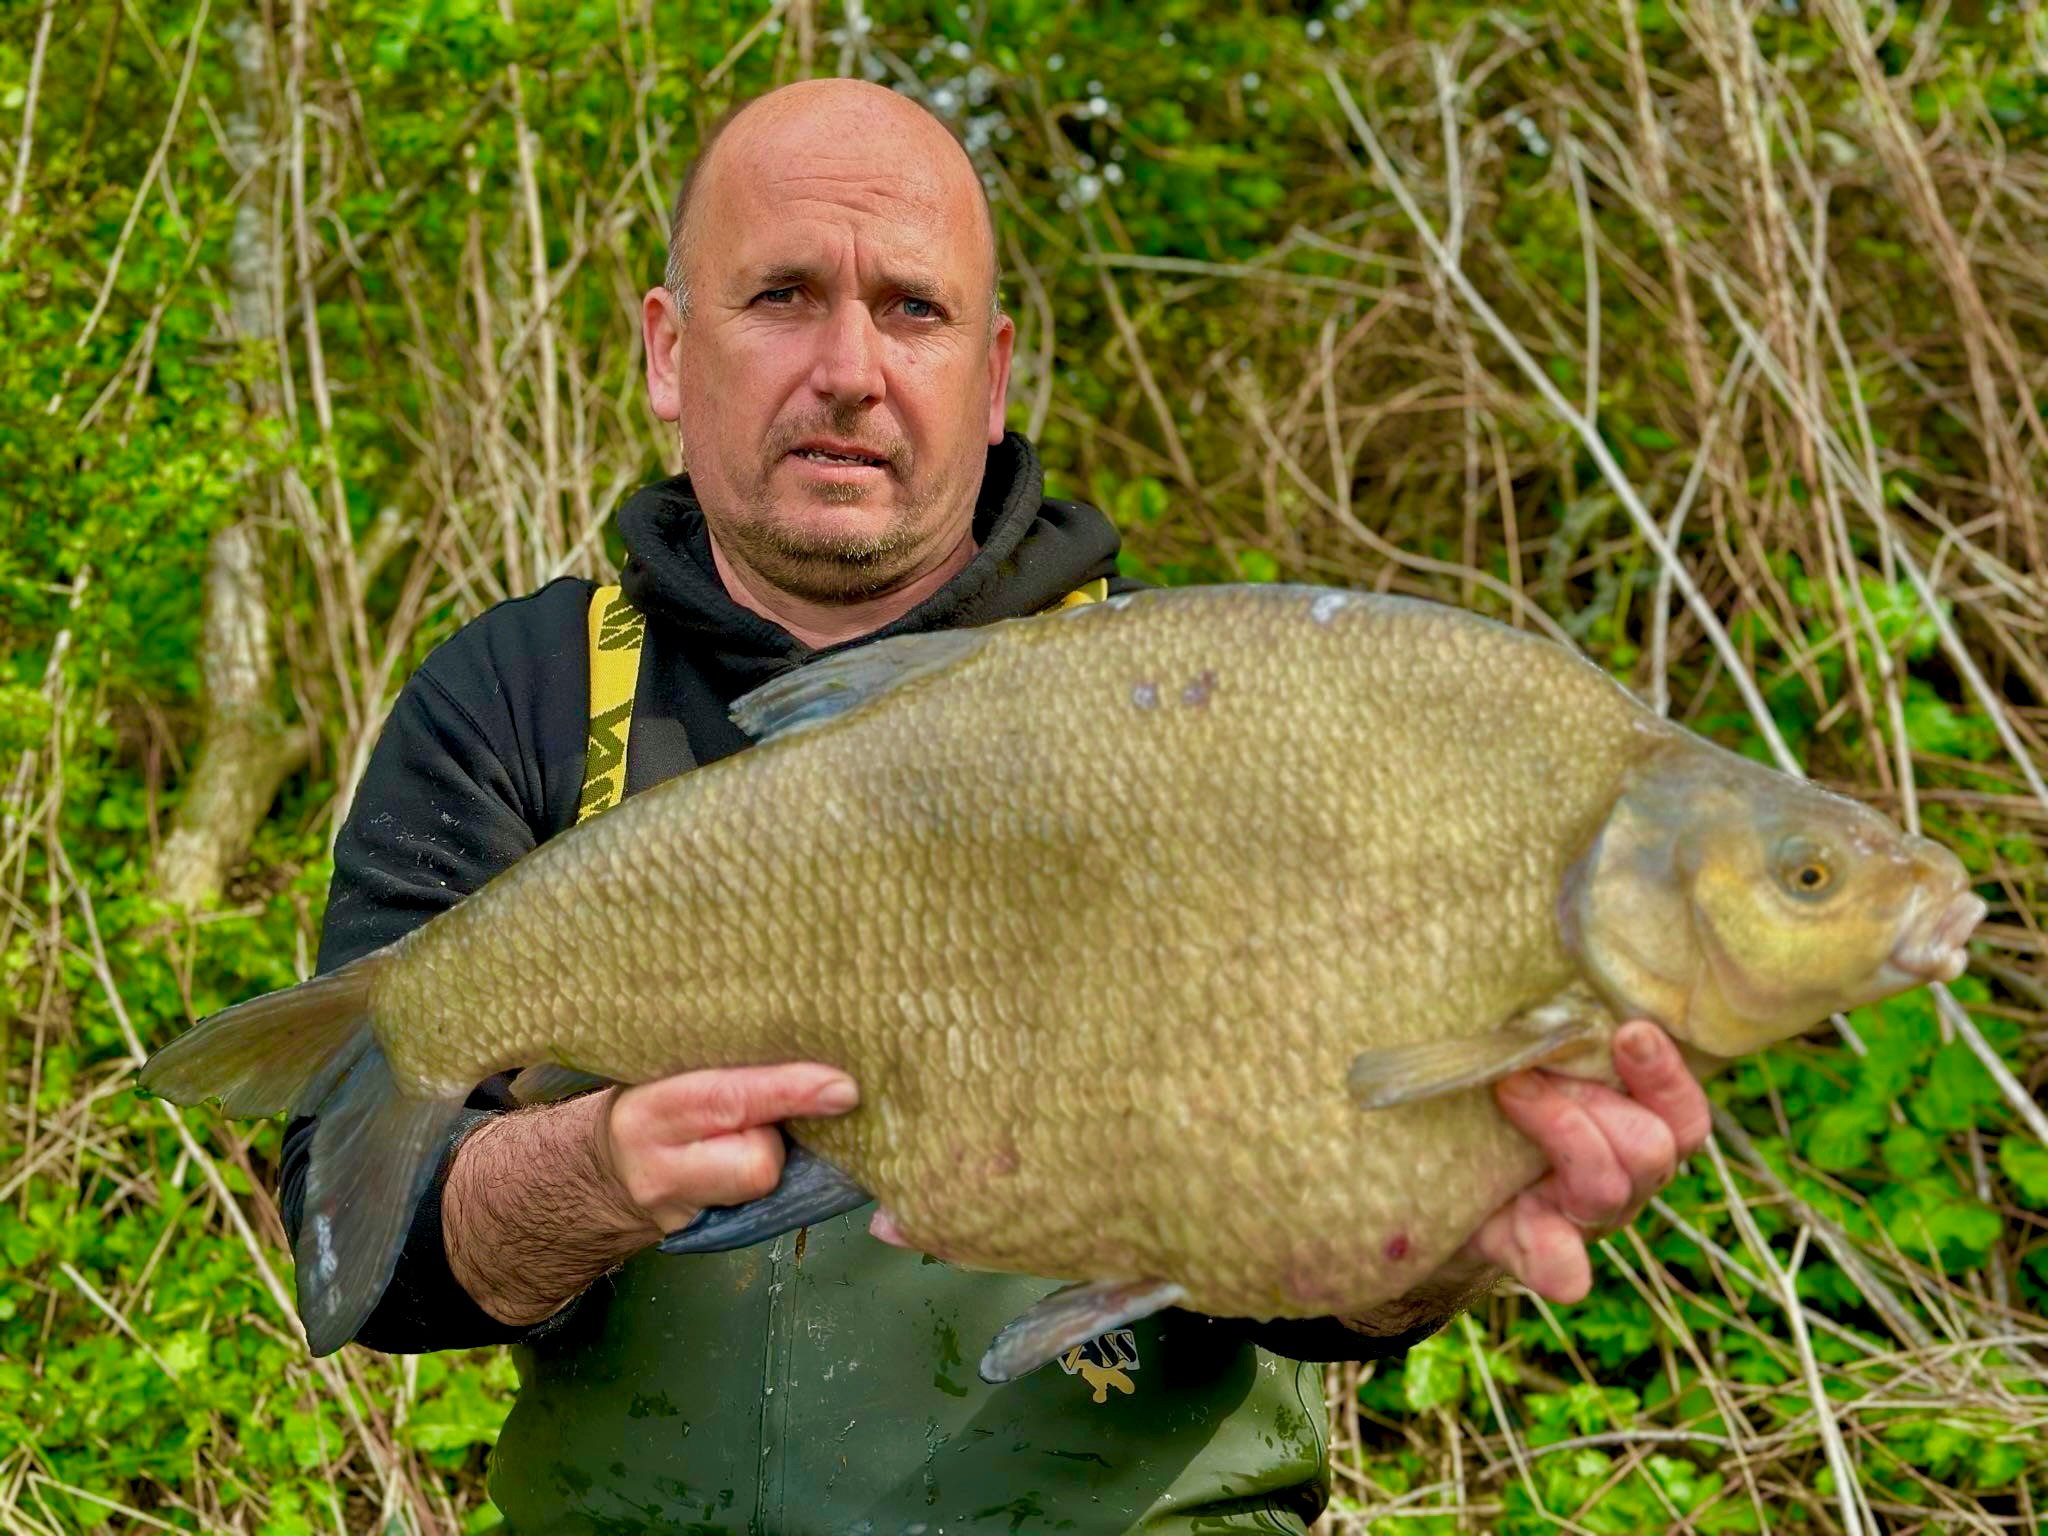 Lee proudly displaying his 17lb 2oz bream.